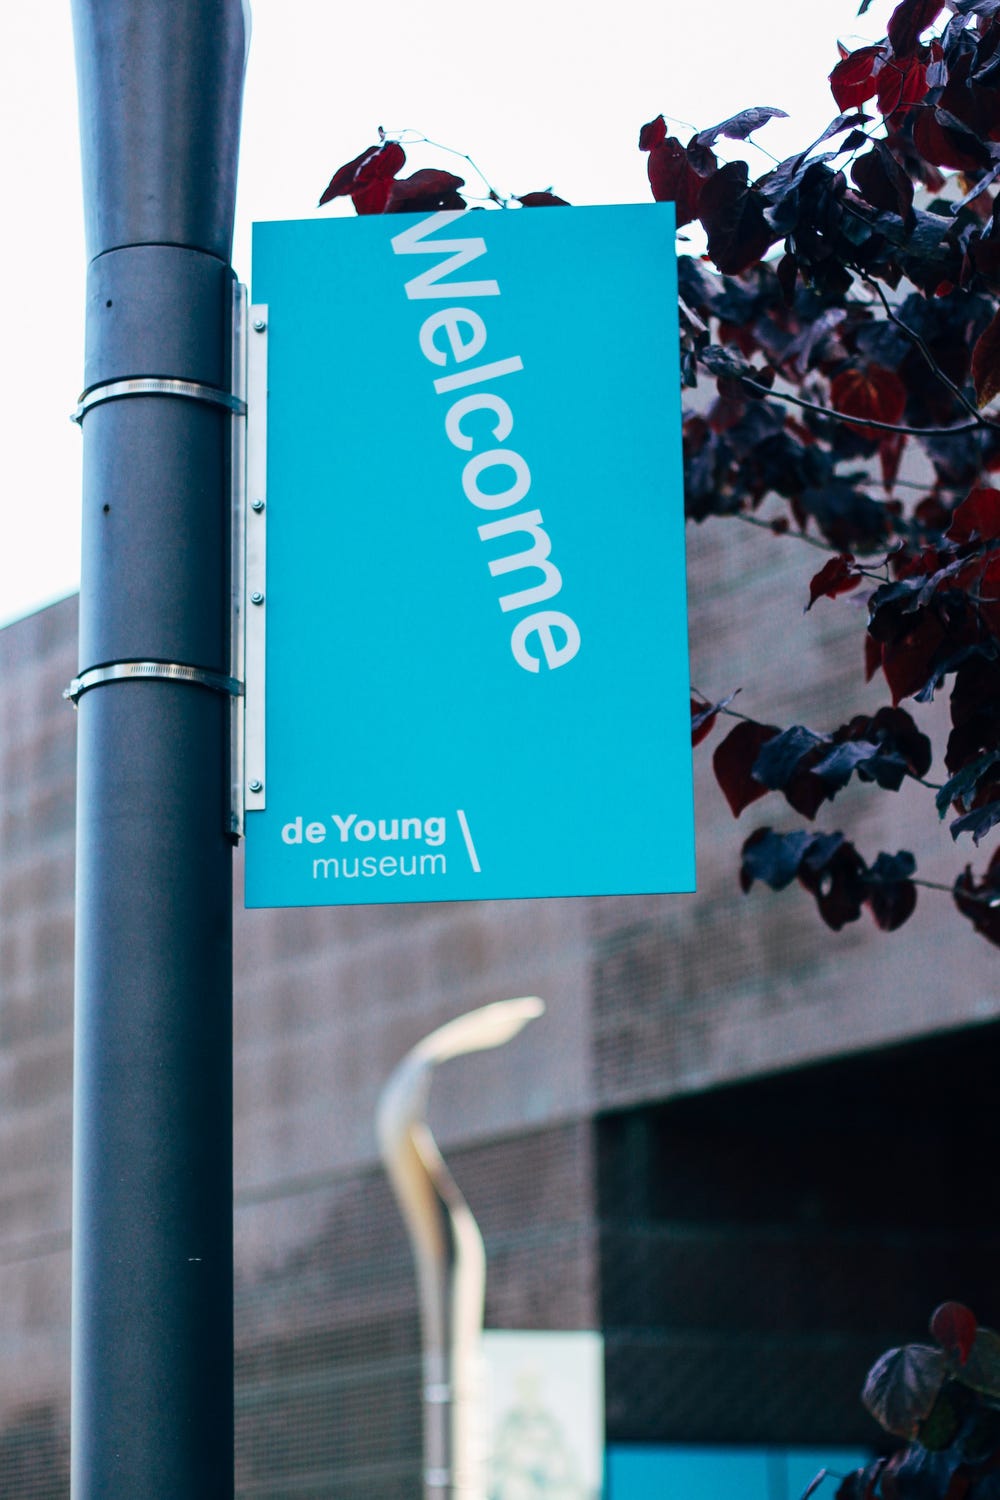 teal sign that reads "Welcome" and "de Young museum"